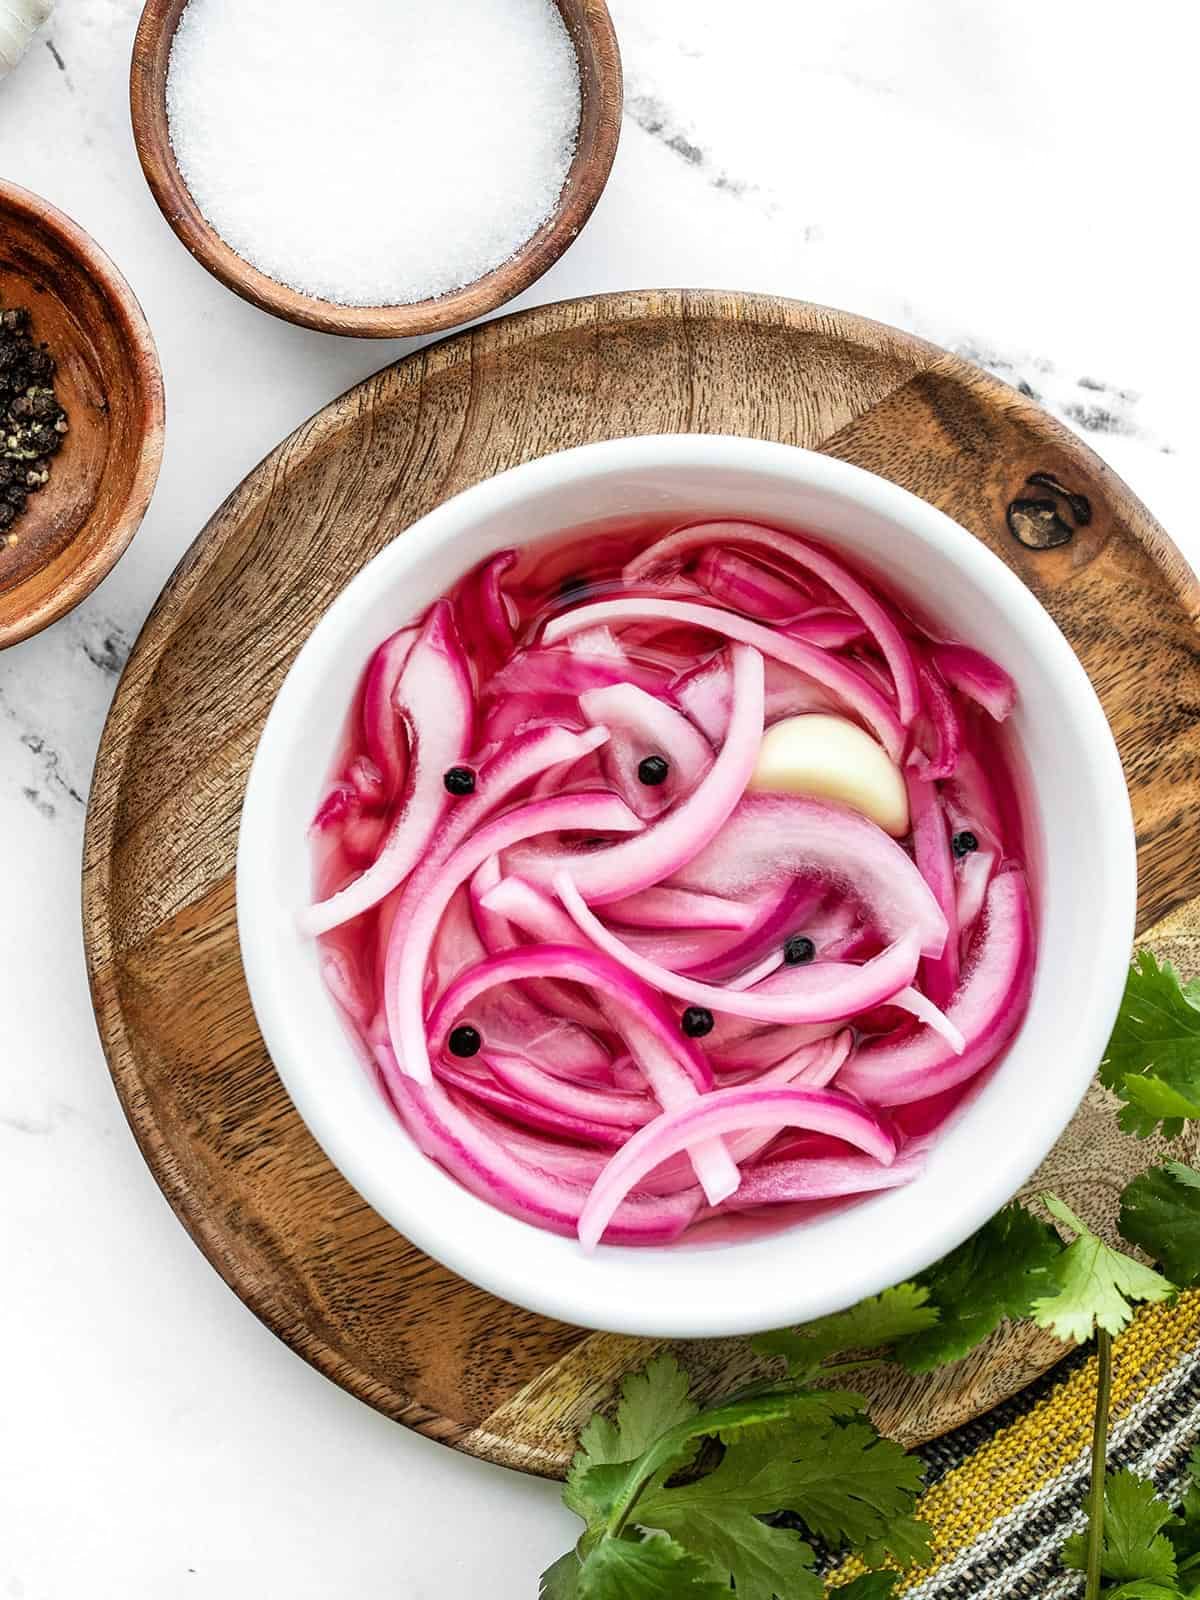 Overhead view of a bowl of pickled red onions on a wooden plate with wooden bowls on the side